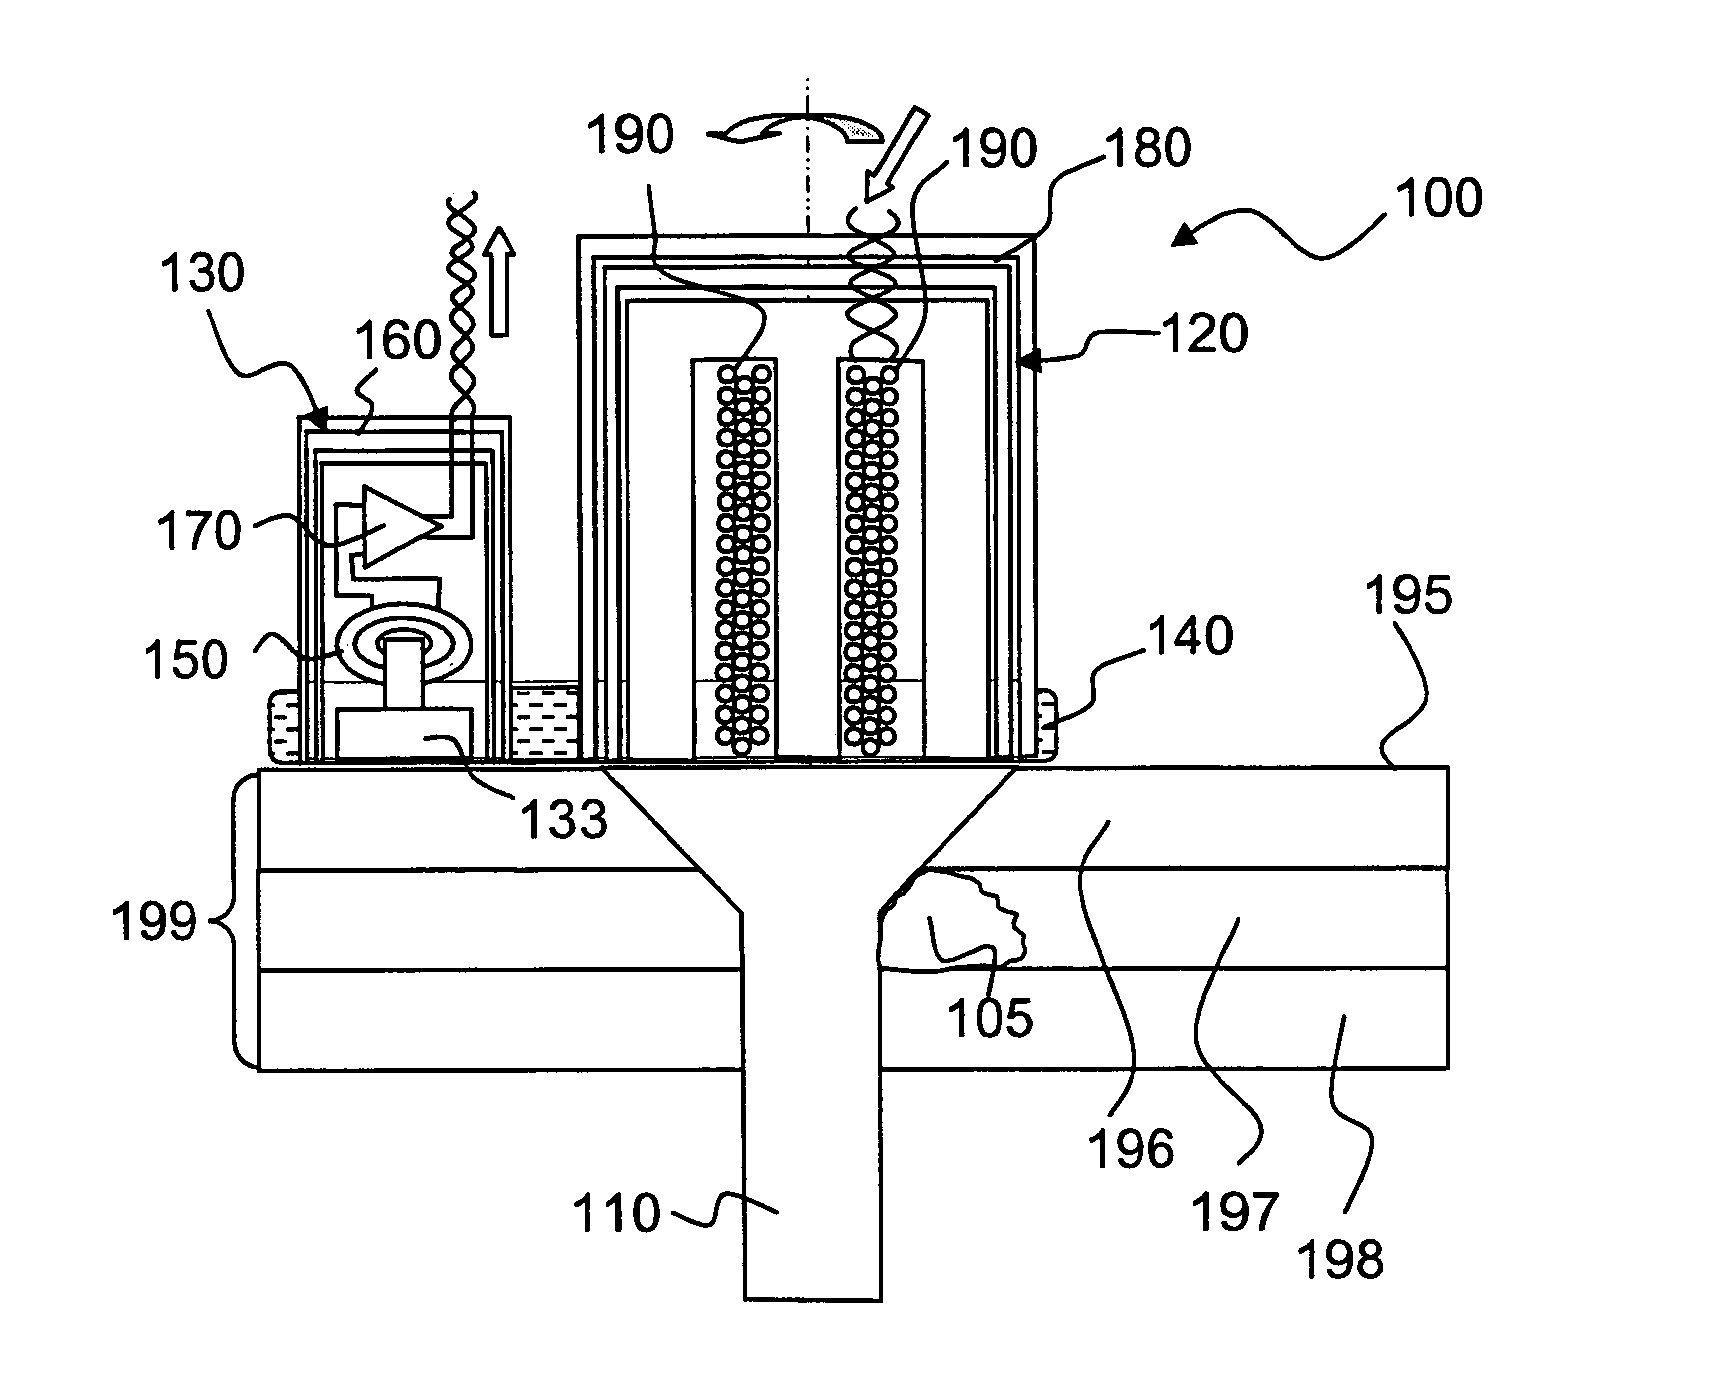 Apparatus and method for eddy-current magnetic scanning a surface to detect sub-surface cracks around a boundary